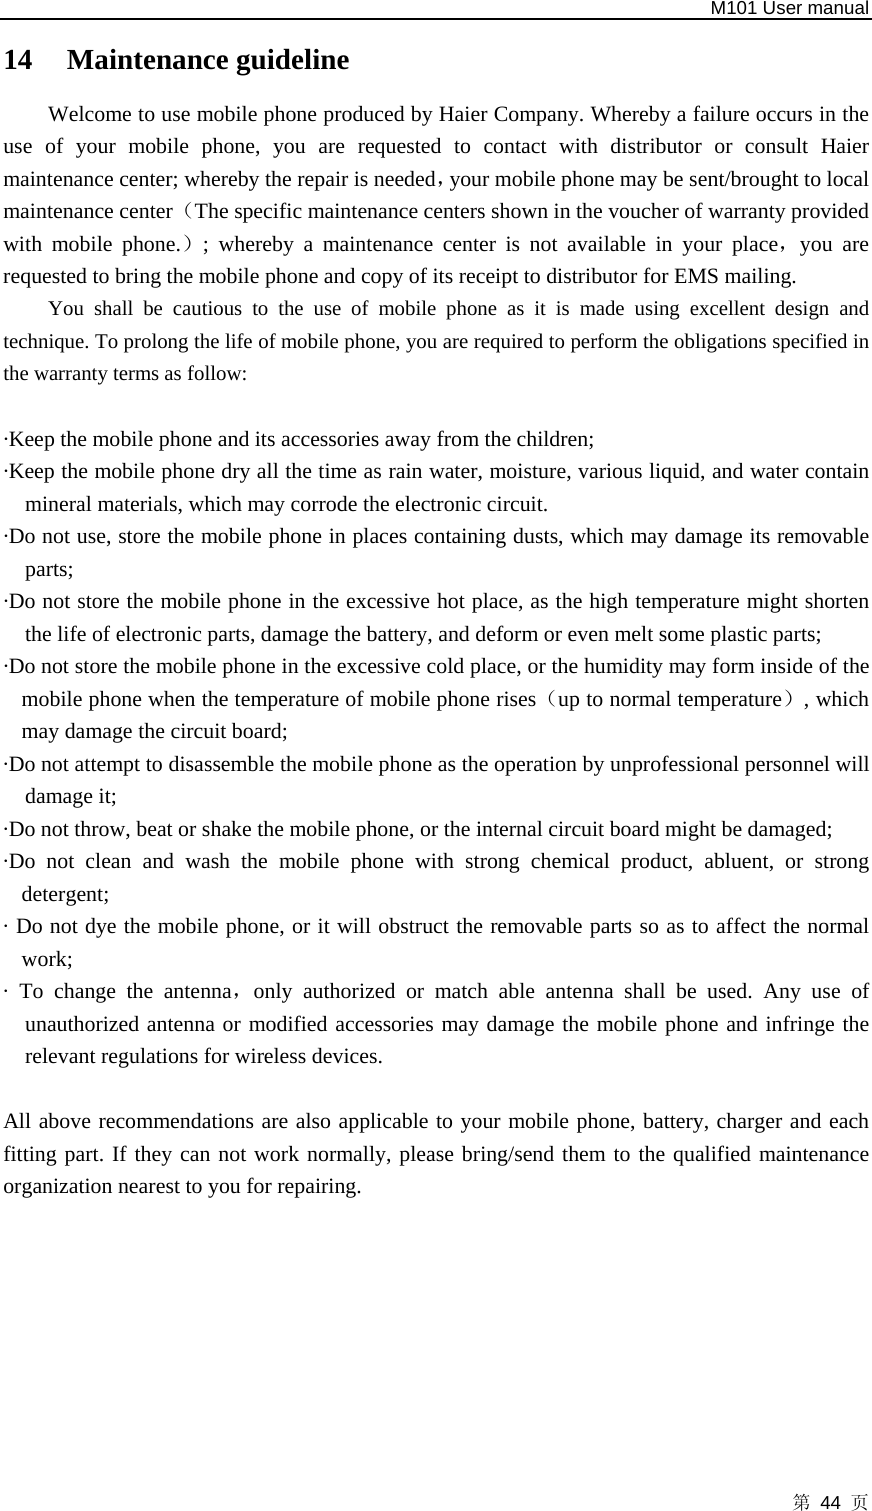   M101 User manual 第 44 页 14 Maintenance guideline   Welcome to use mobile phone produced by Haier Company. Whereby a failure occurs in the use of your mobile phone, you are requested to contact with distributor or consult Haier maintenance center; whereby the repair is needed，your mobile phone may be sent/brought to local maintenance center（The specific maintenance centers shown in the voucher of warranty provided with mobile phone.）; whereby a maintenance center is not available in your place，you are requested to bring the mobile phone and copy of its receipt to distributor for EMS mailing.   You shall be cautious to the use of mobile phone as it is made using excellent design and technique. To prolong the life of mobile phone, you are required to perform the obligations specified in the warranty terms as follow:    ·Keep the mobile phone and its accessories away from the children;   ·Keep the mobile phone dry all the time as rain water, moisture, various liquid, and water contain mineral materials, which may corrode the electronic circuit. ·Do not use, store the mobile phone in places containing dusts, which may damage its removable parts;  ·Do not store the mobile phone in the excessive hot place, as the high temperature might shorten the life of electronic parts, damage the battery, and deform or even melt some plastic parts;   ·Do not store the mobile phone in the excessive cold place, or the humidity may form inside of the mobile phone when the temperature of mobile phone rises（up to normal temperature）, which may damage the circuit board;   ·Do not attempt to disassemble the mobile phone as the operation by unprofessional personnel will damage it;   ·Do not throw, beat or shake the mobile phone, or the internal circuit board might be damaged;   ·Do not clean and wash the mobile phone with strong chemical product, abluent, or strong detergent;  · Do not dye the mobile phone, or it will obstruct the removable parts so as to affect the normal work;  · To change the antenna，only authorized or match able antenna shall be used. Any use of unauthorized antenna or modified accessories may damage the mobile phone and infringe the relevant regulations for wireless devices.  All above recommendations are also applicable to your mobile phone, battery, charger and each fitting part. If they can not work normally, please bring/send them to the qualified maintenance organization nearest to you for repairing.   